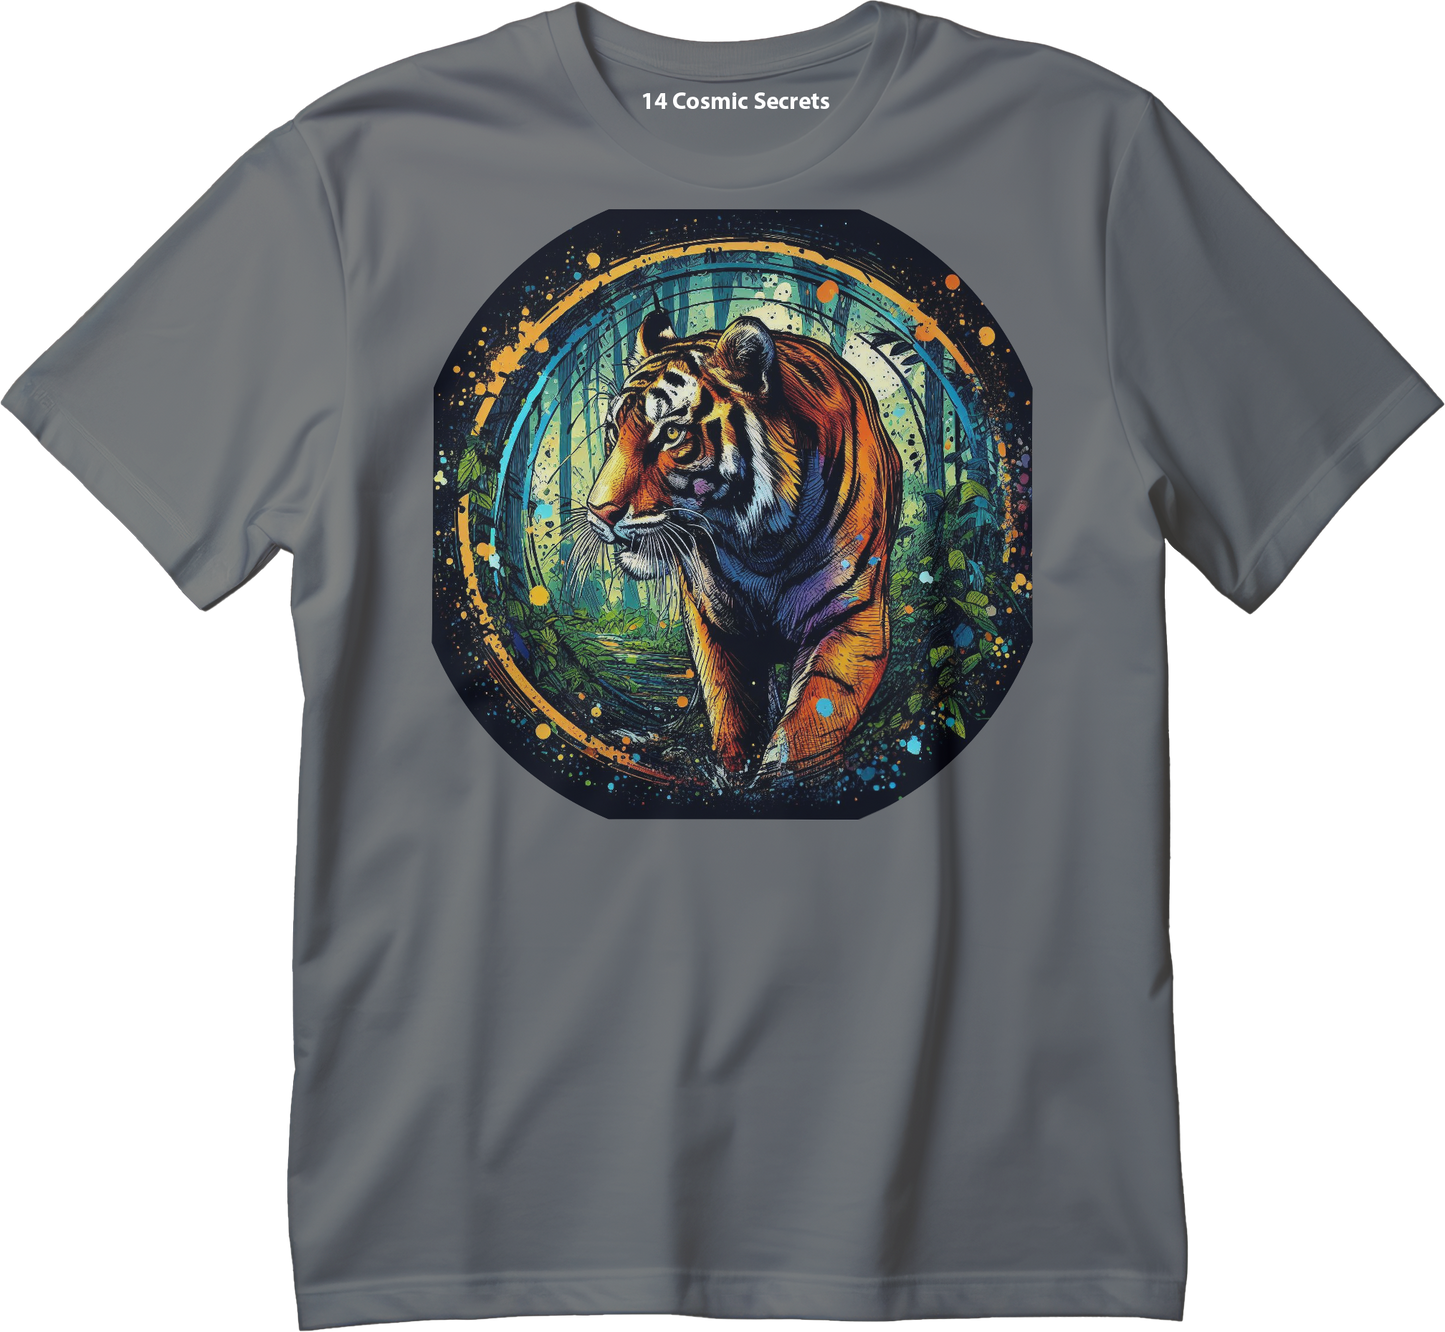 Tiger Kingdom Crest Shirt Graphic Printed T-Shirt  Cotton T-Shirt Magnificence of India T-Shirt